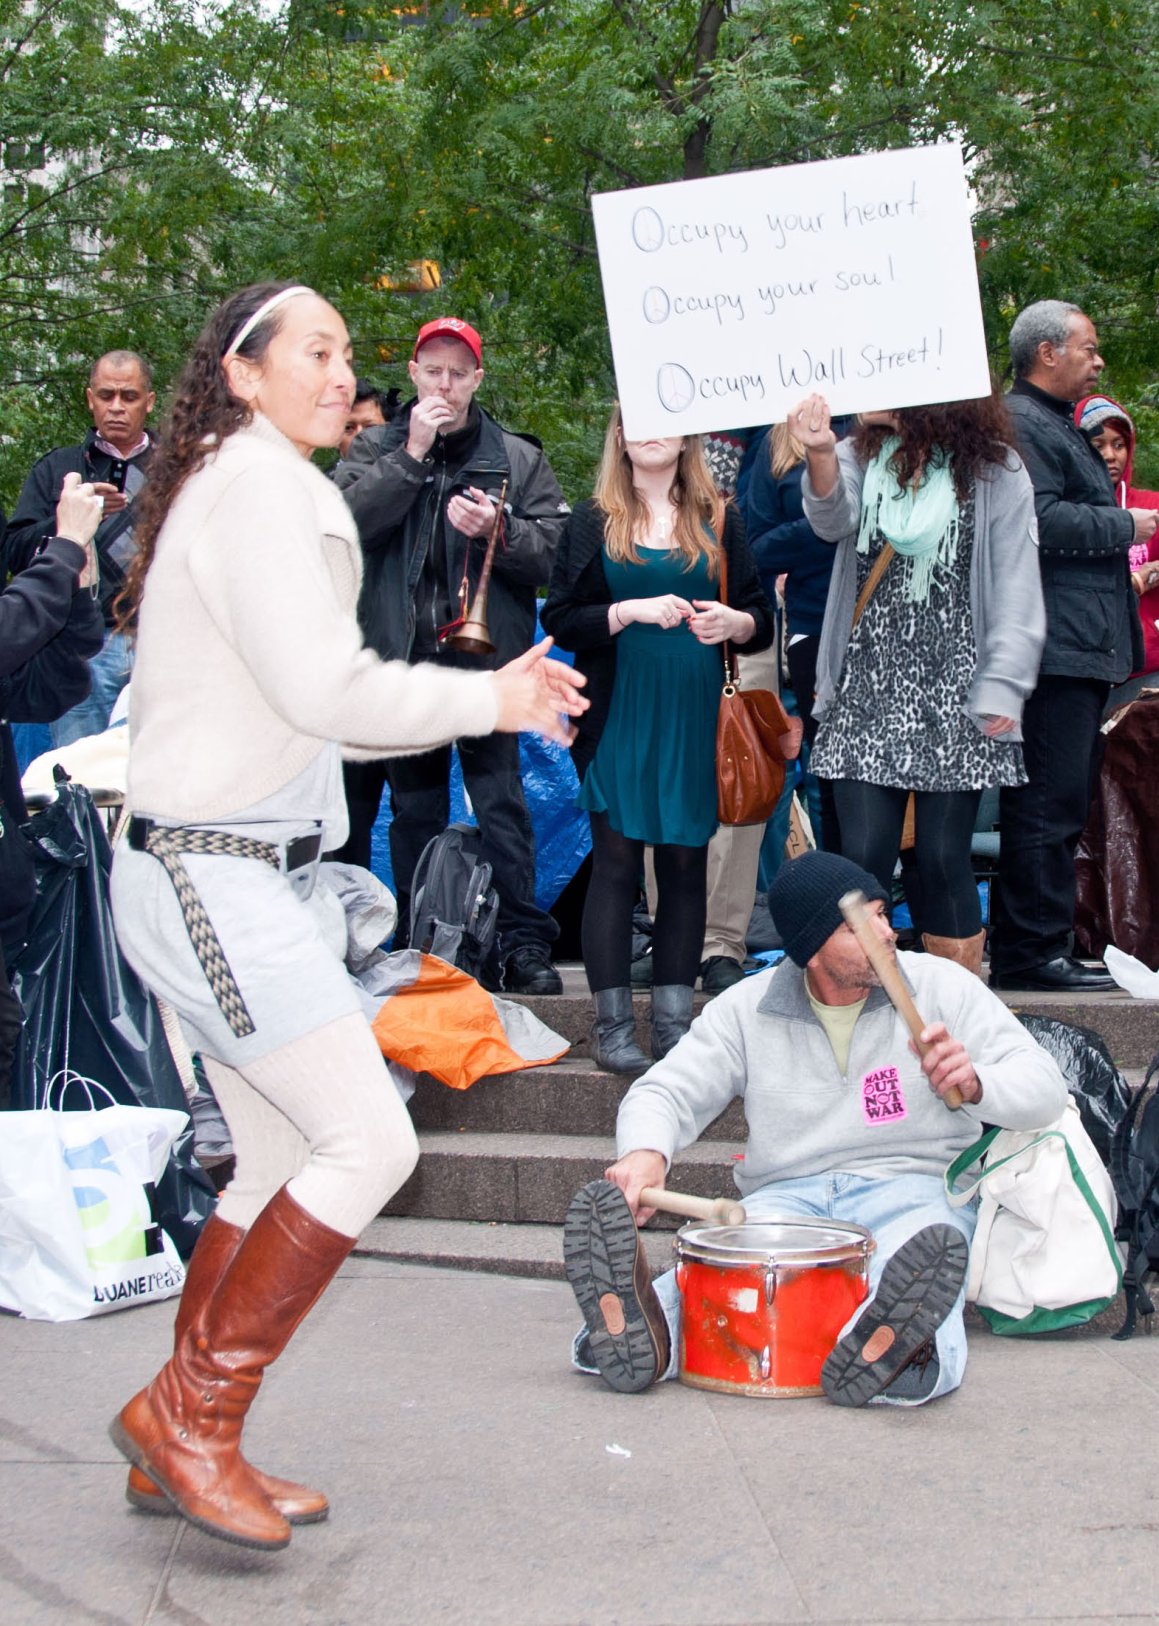 a group of people in costume gathered around a man with a sign